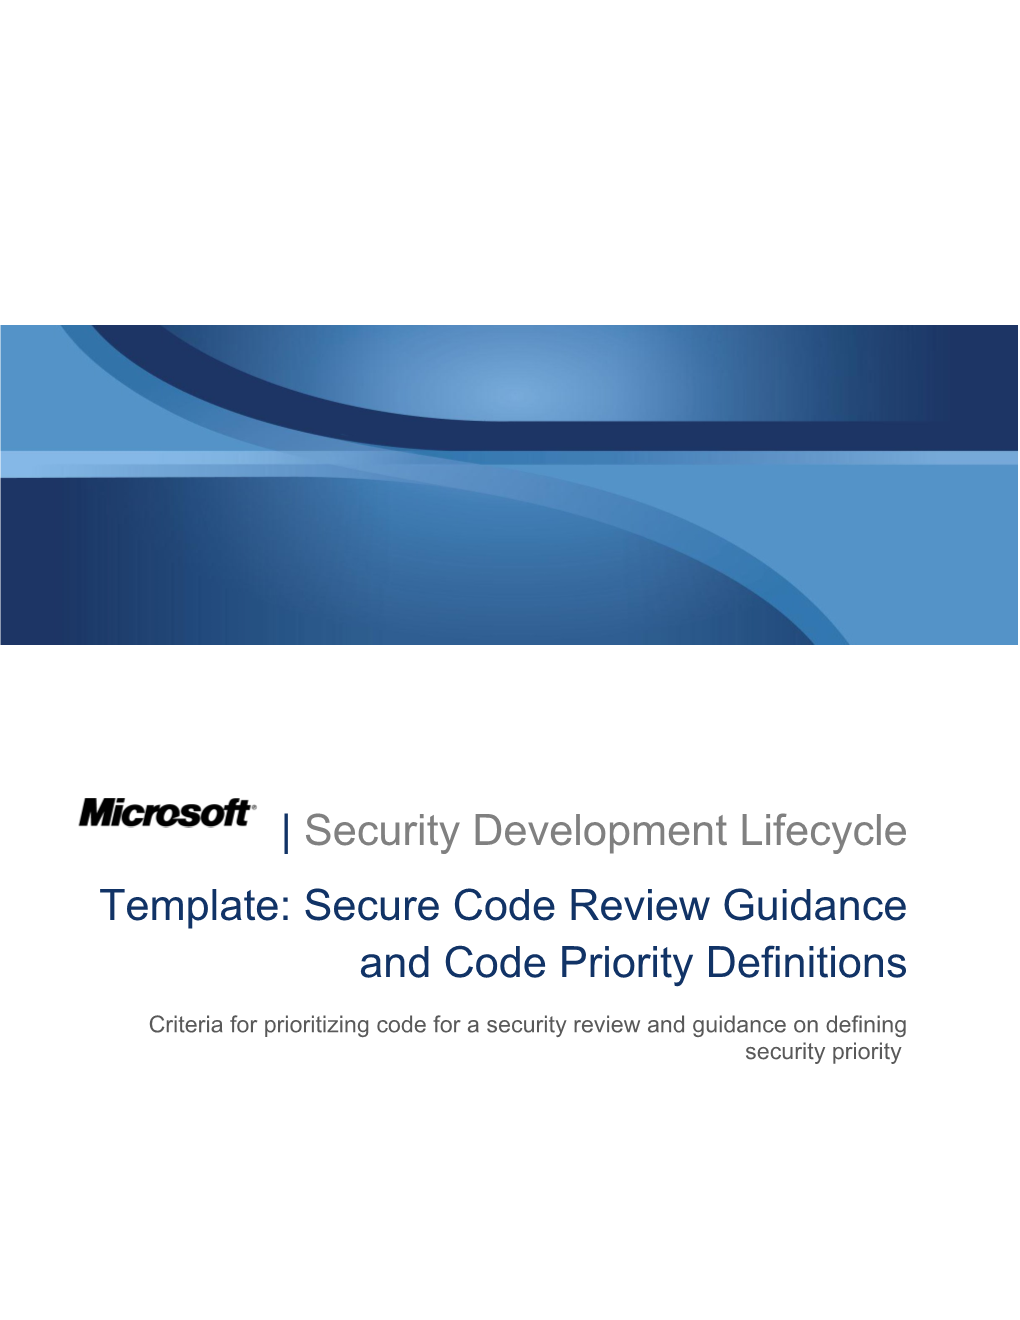 Template: Secure Code Review Guidance and Code Priority Definitions